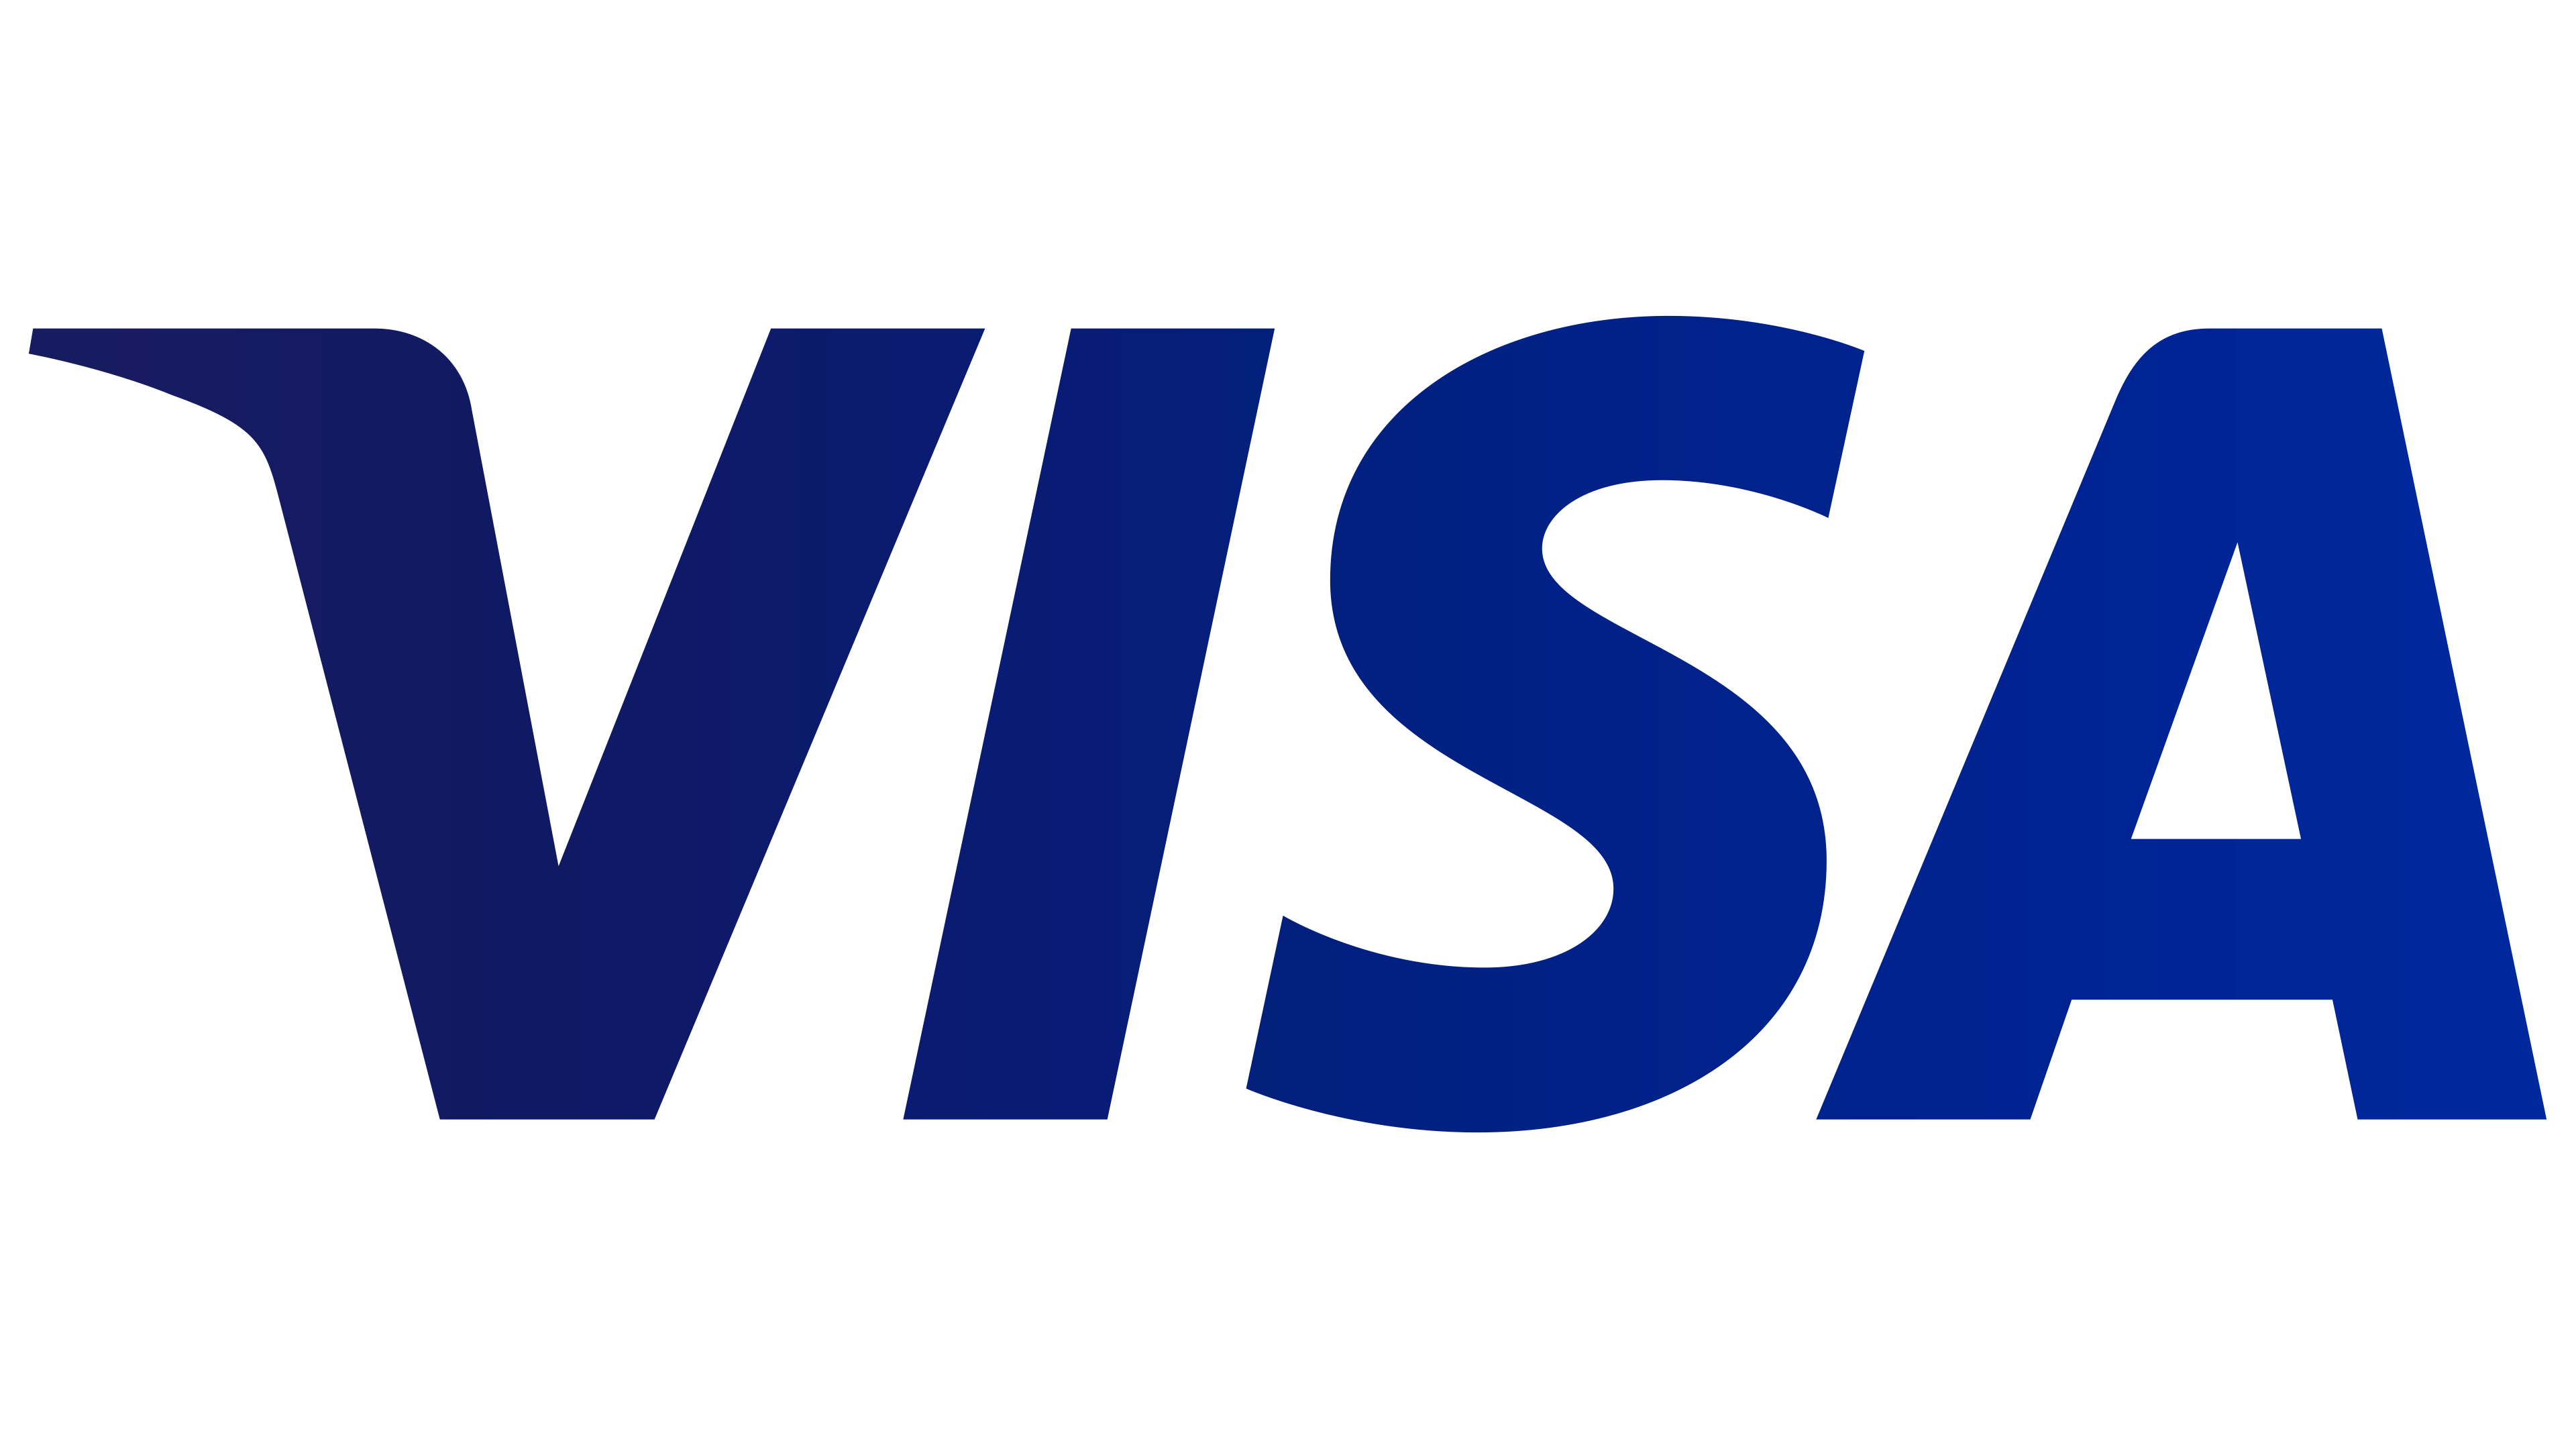 Visa Logo | The most famous brands and company logos in the world